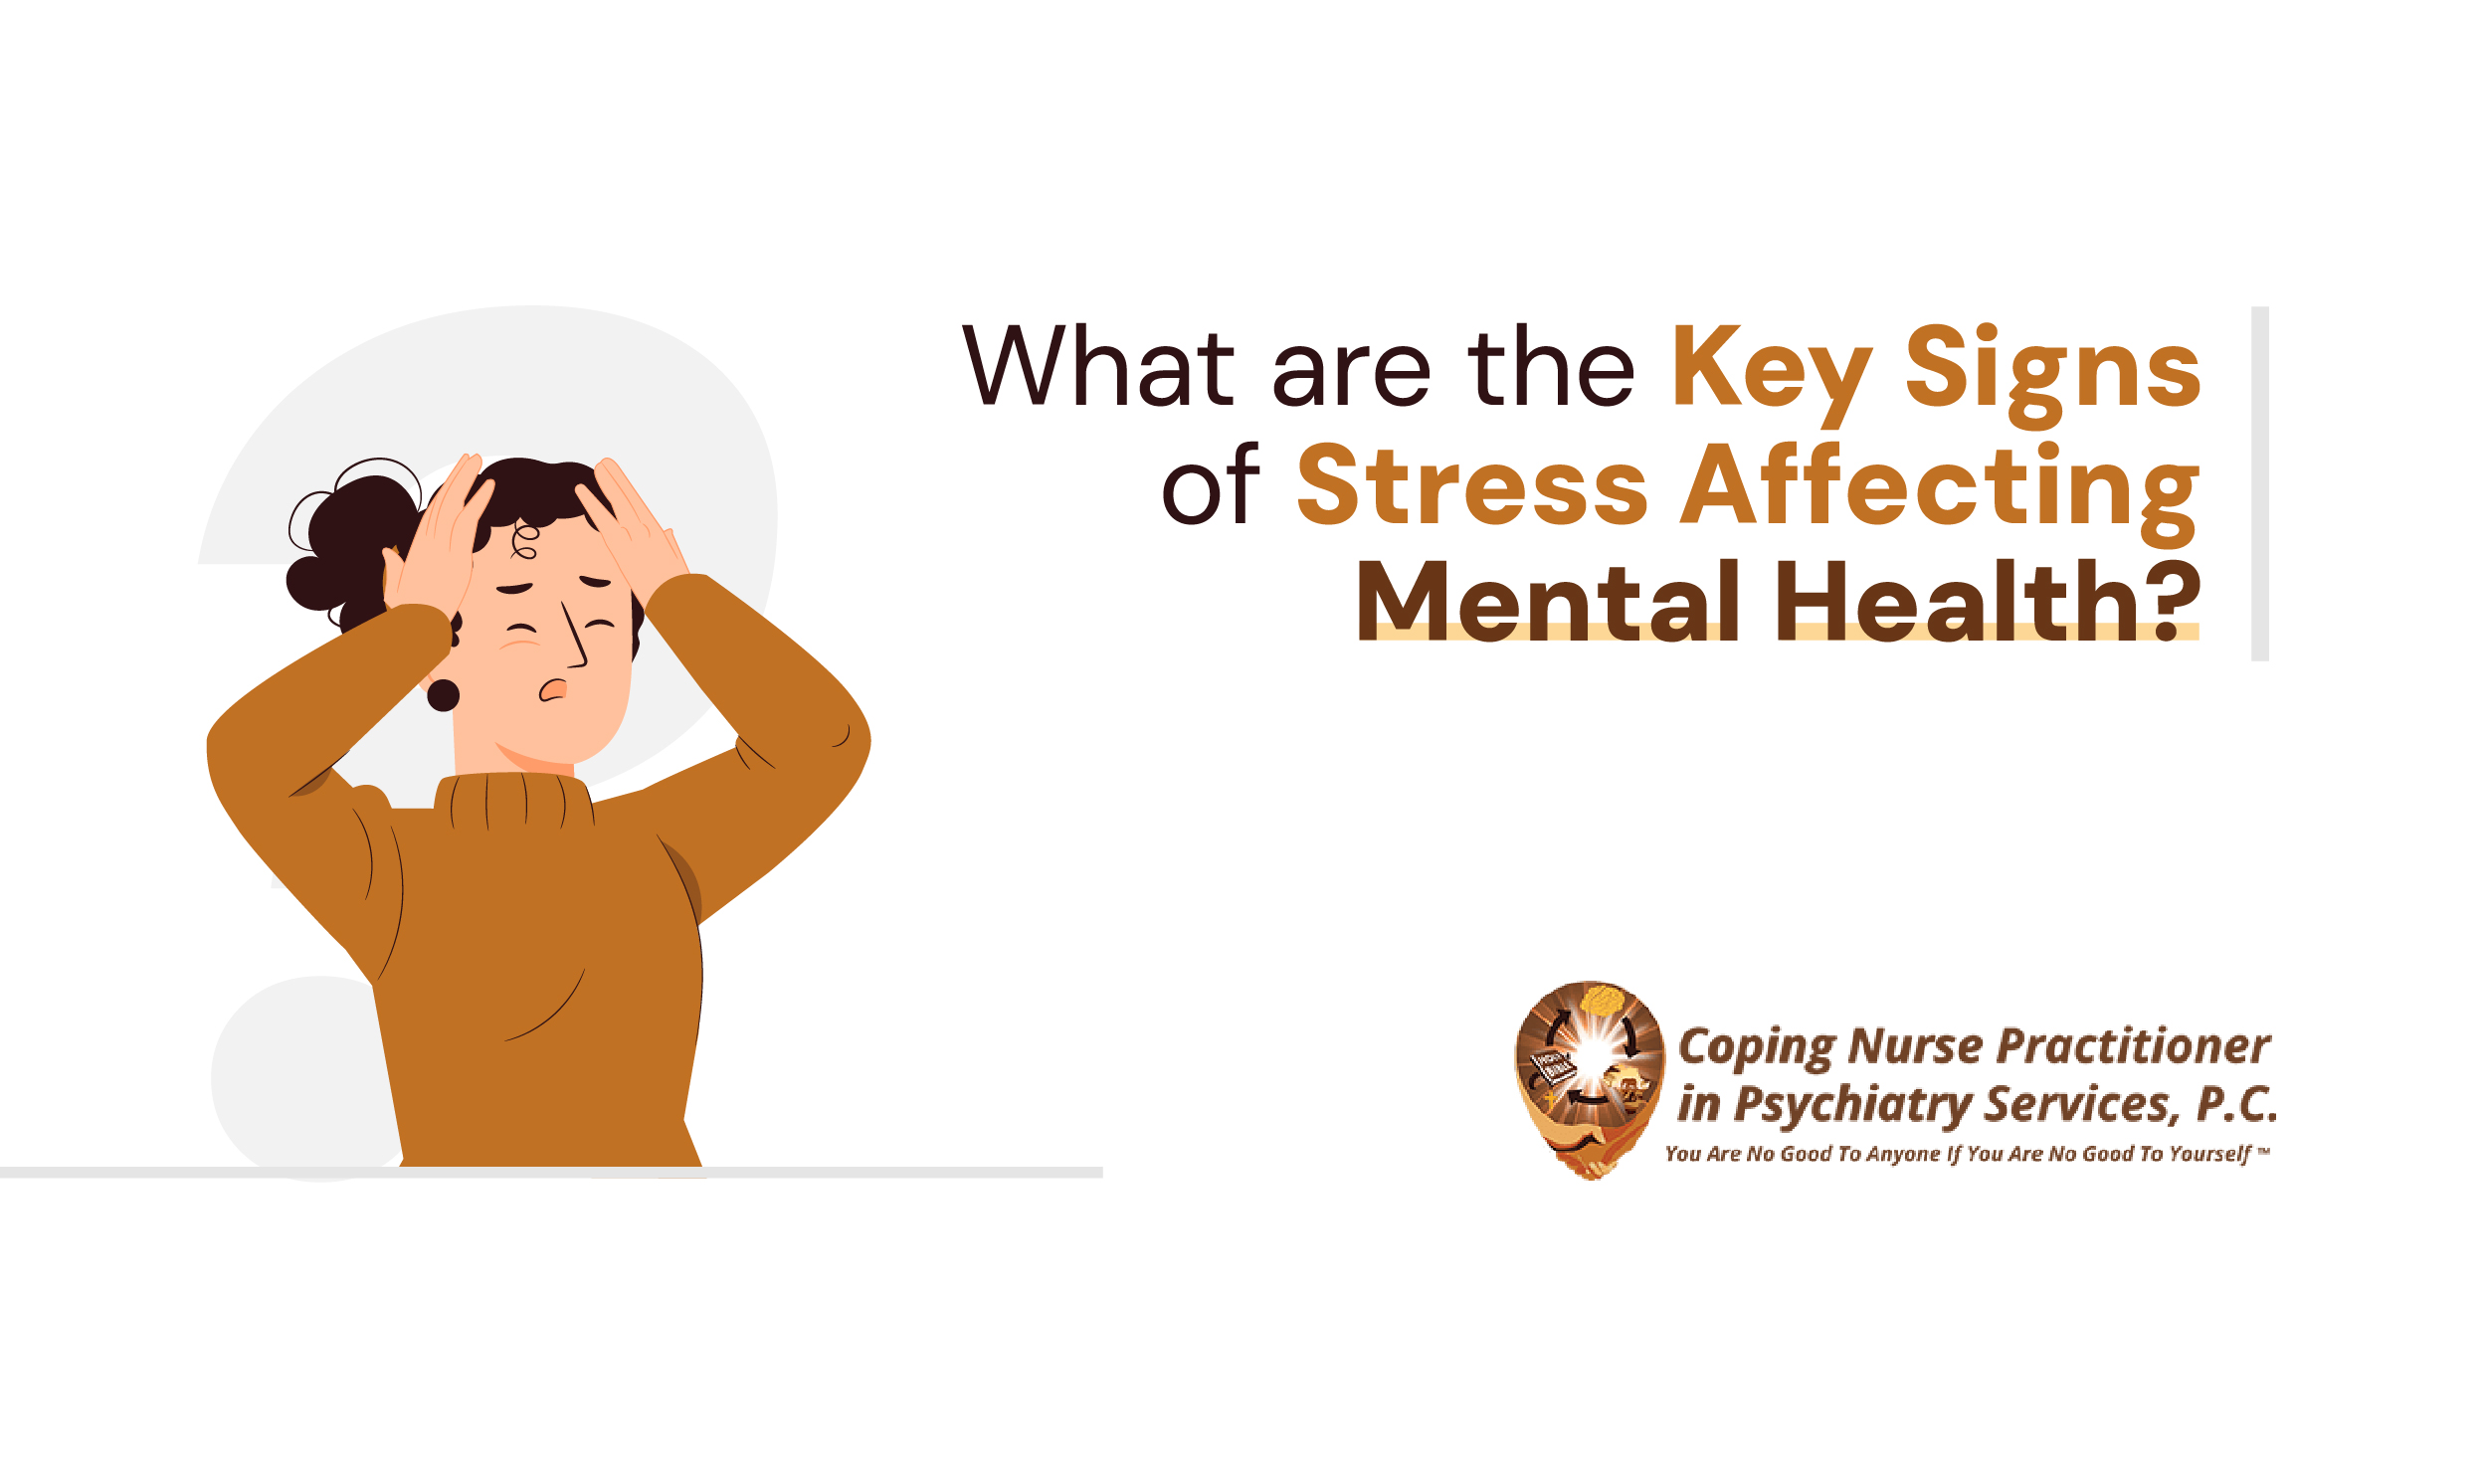 Key Signs of Stress Affecting Mental Health